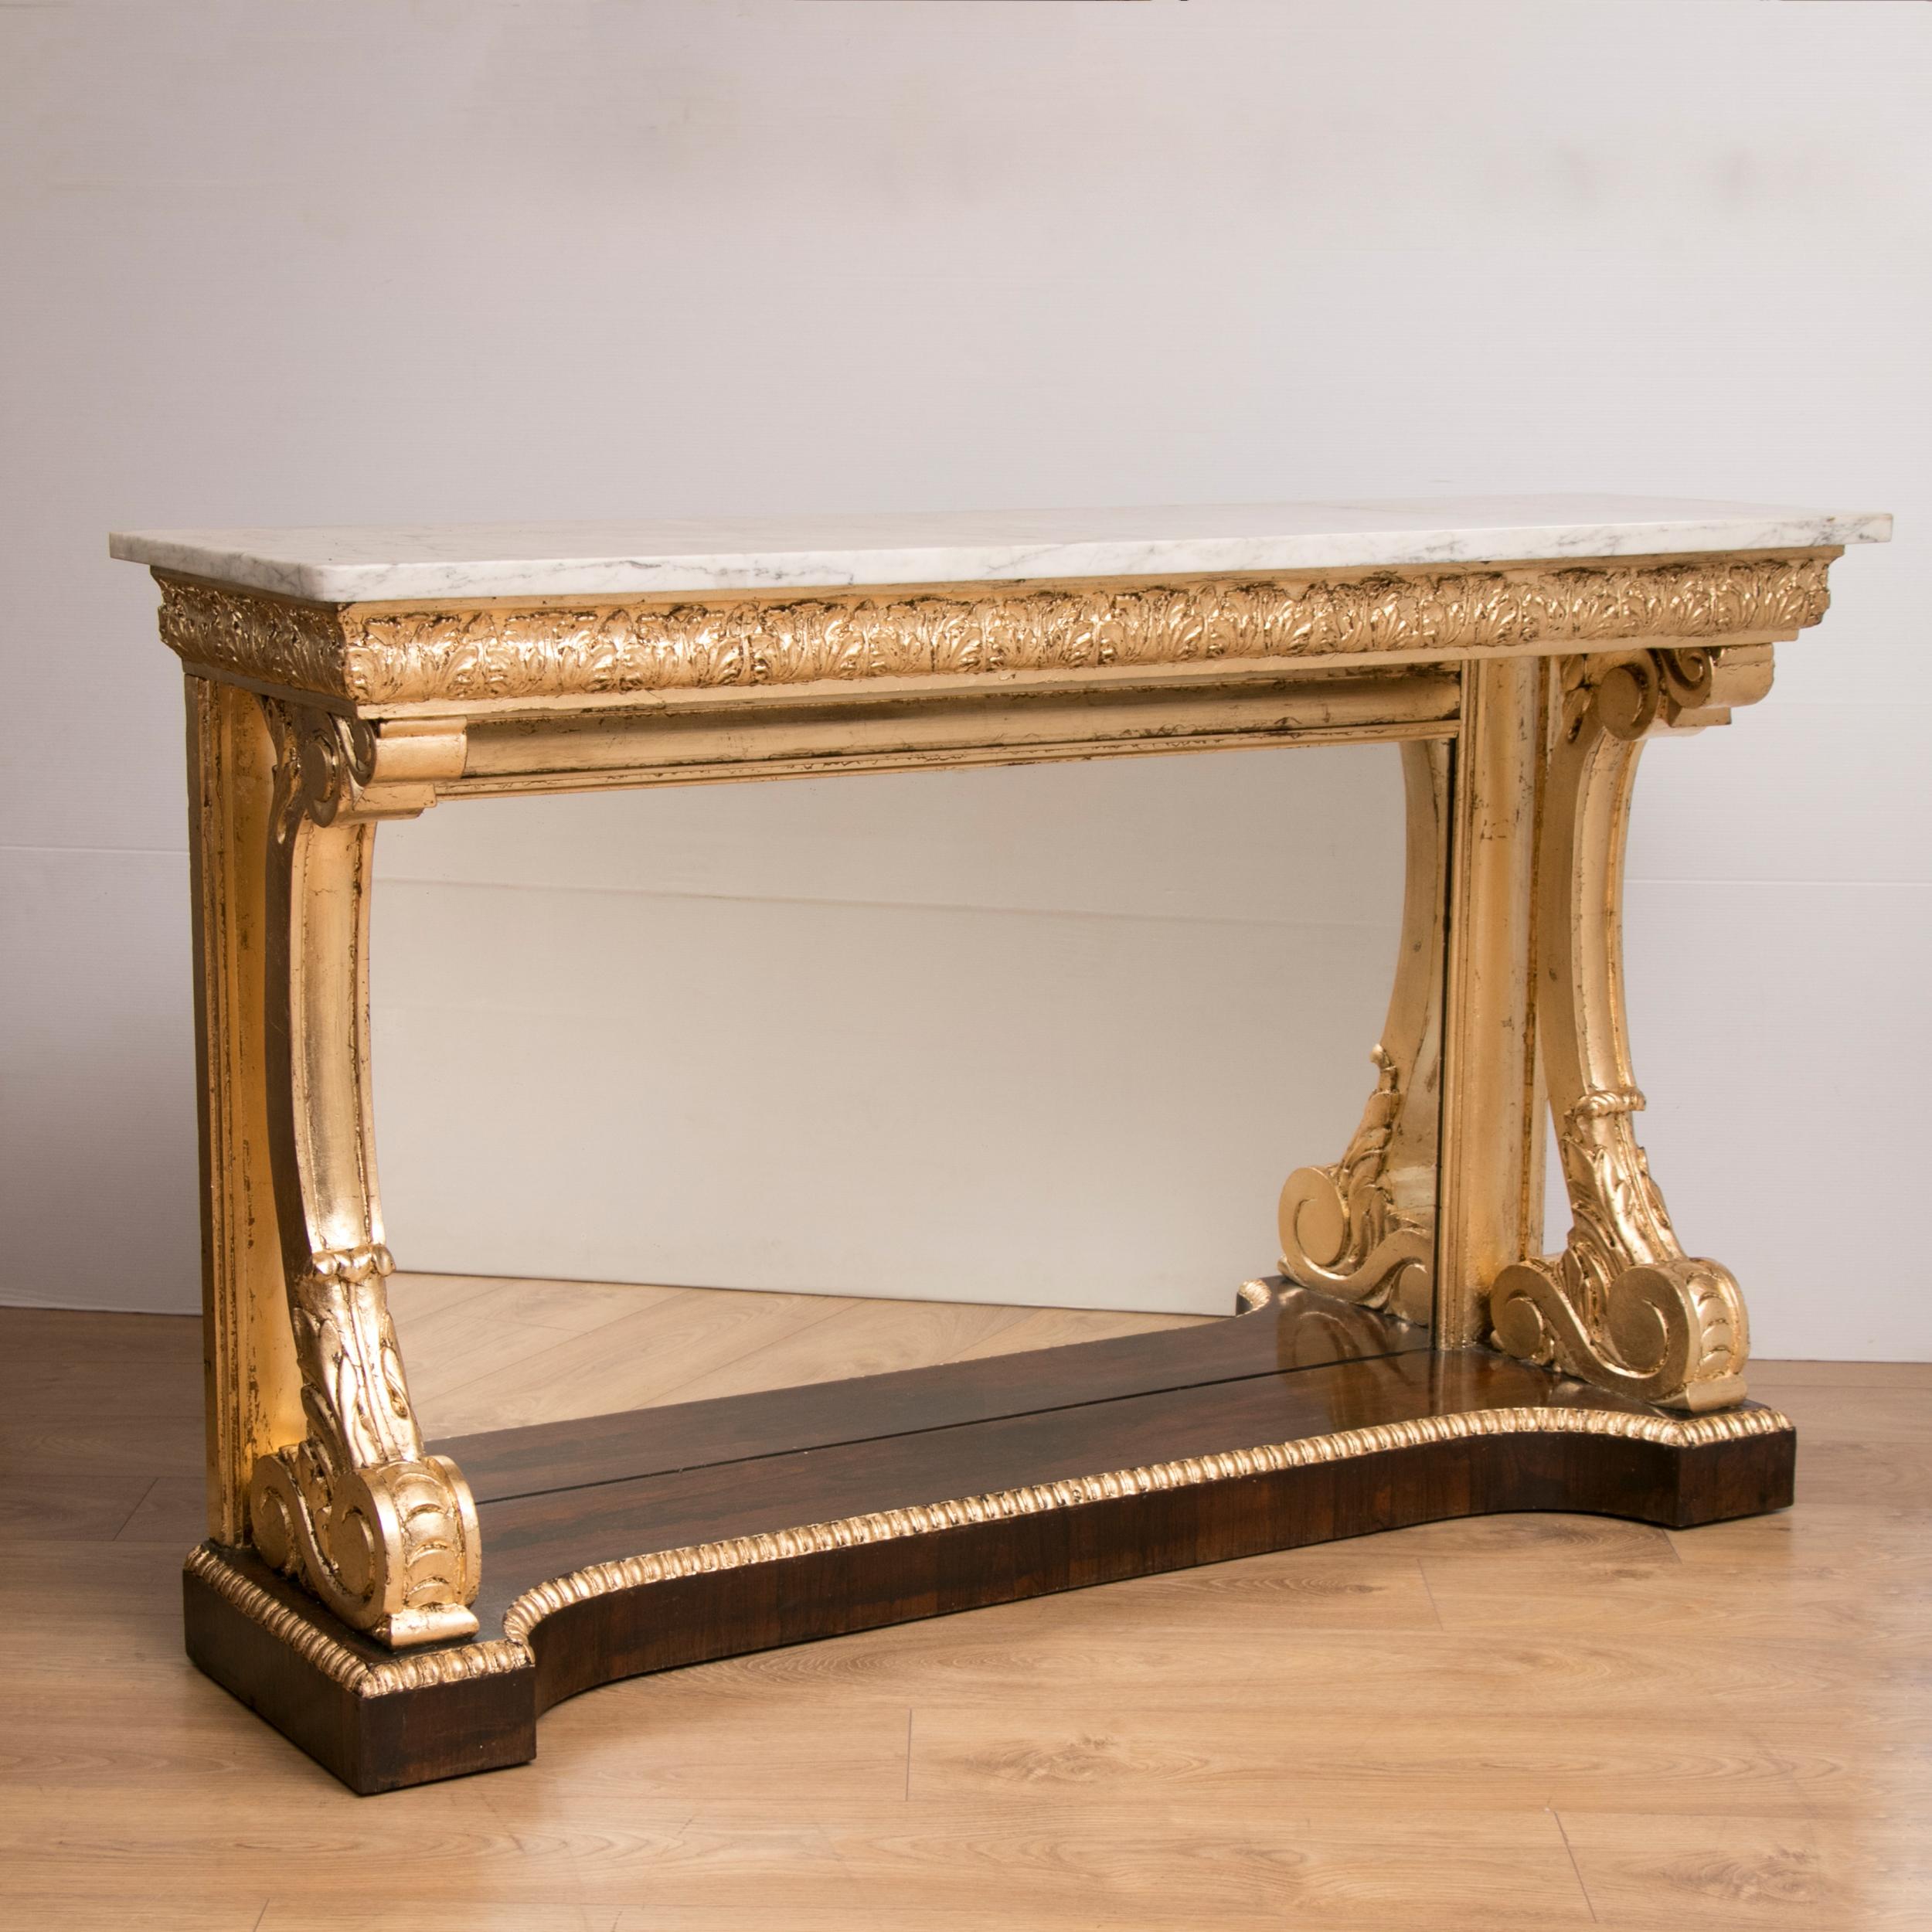 British 19th Century Rosewood Irish Console Table with Mirrored Back and Marble Top For Sale